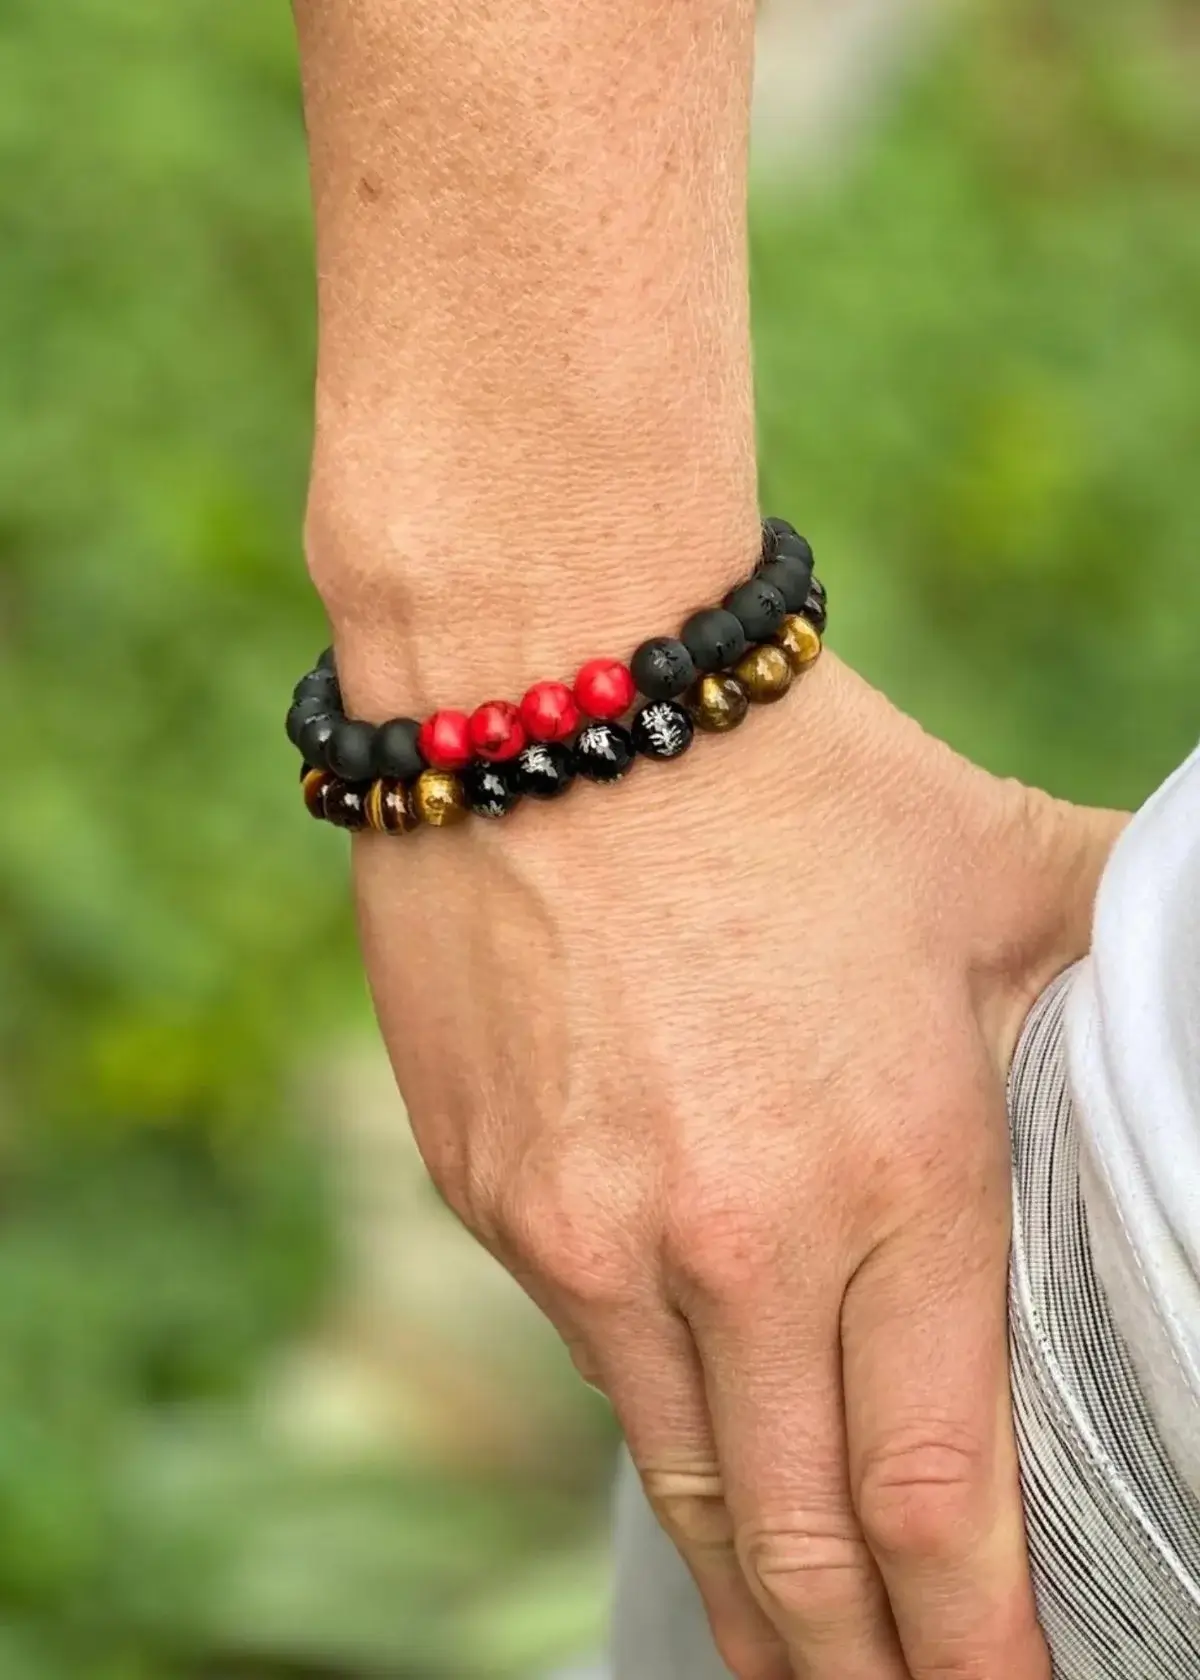 What materials are commonly used to make Red and Black Bracelets?